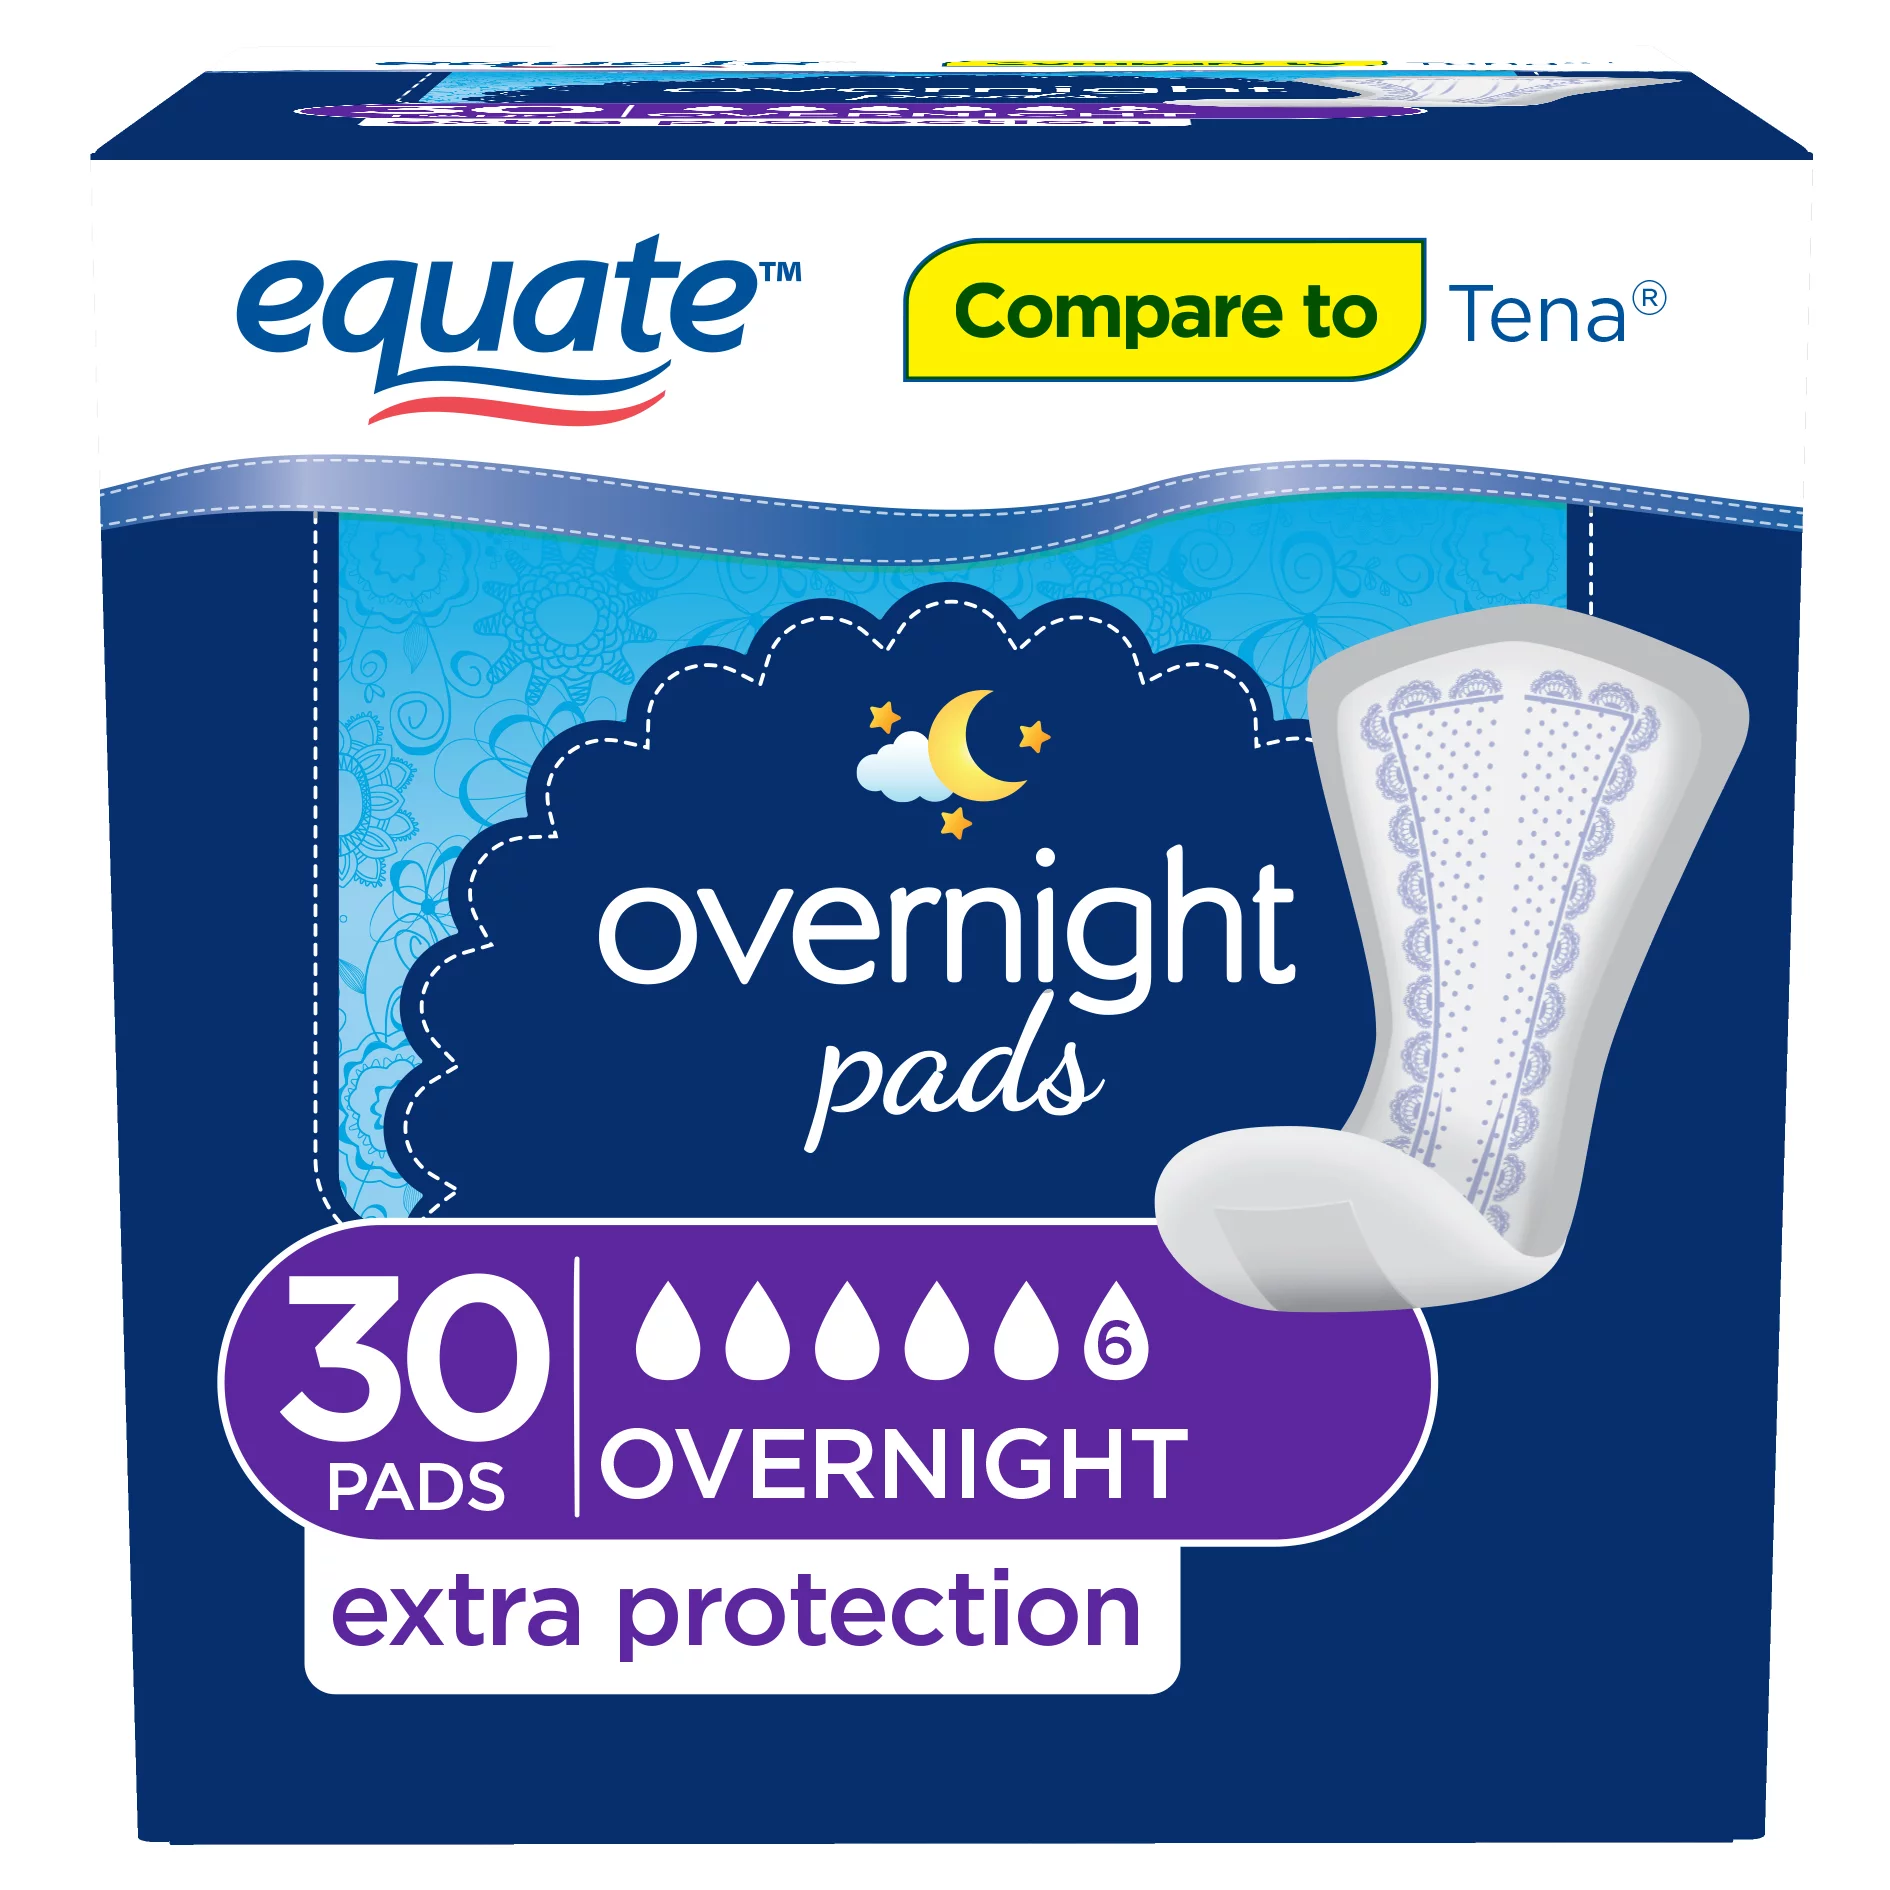 Equate Women's Incontinence Pads, Overnight (30 Count)